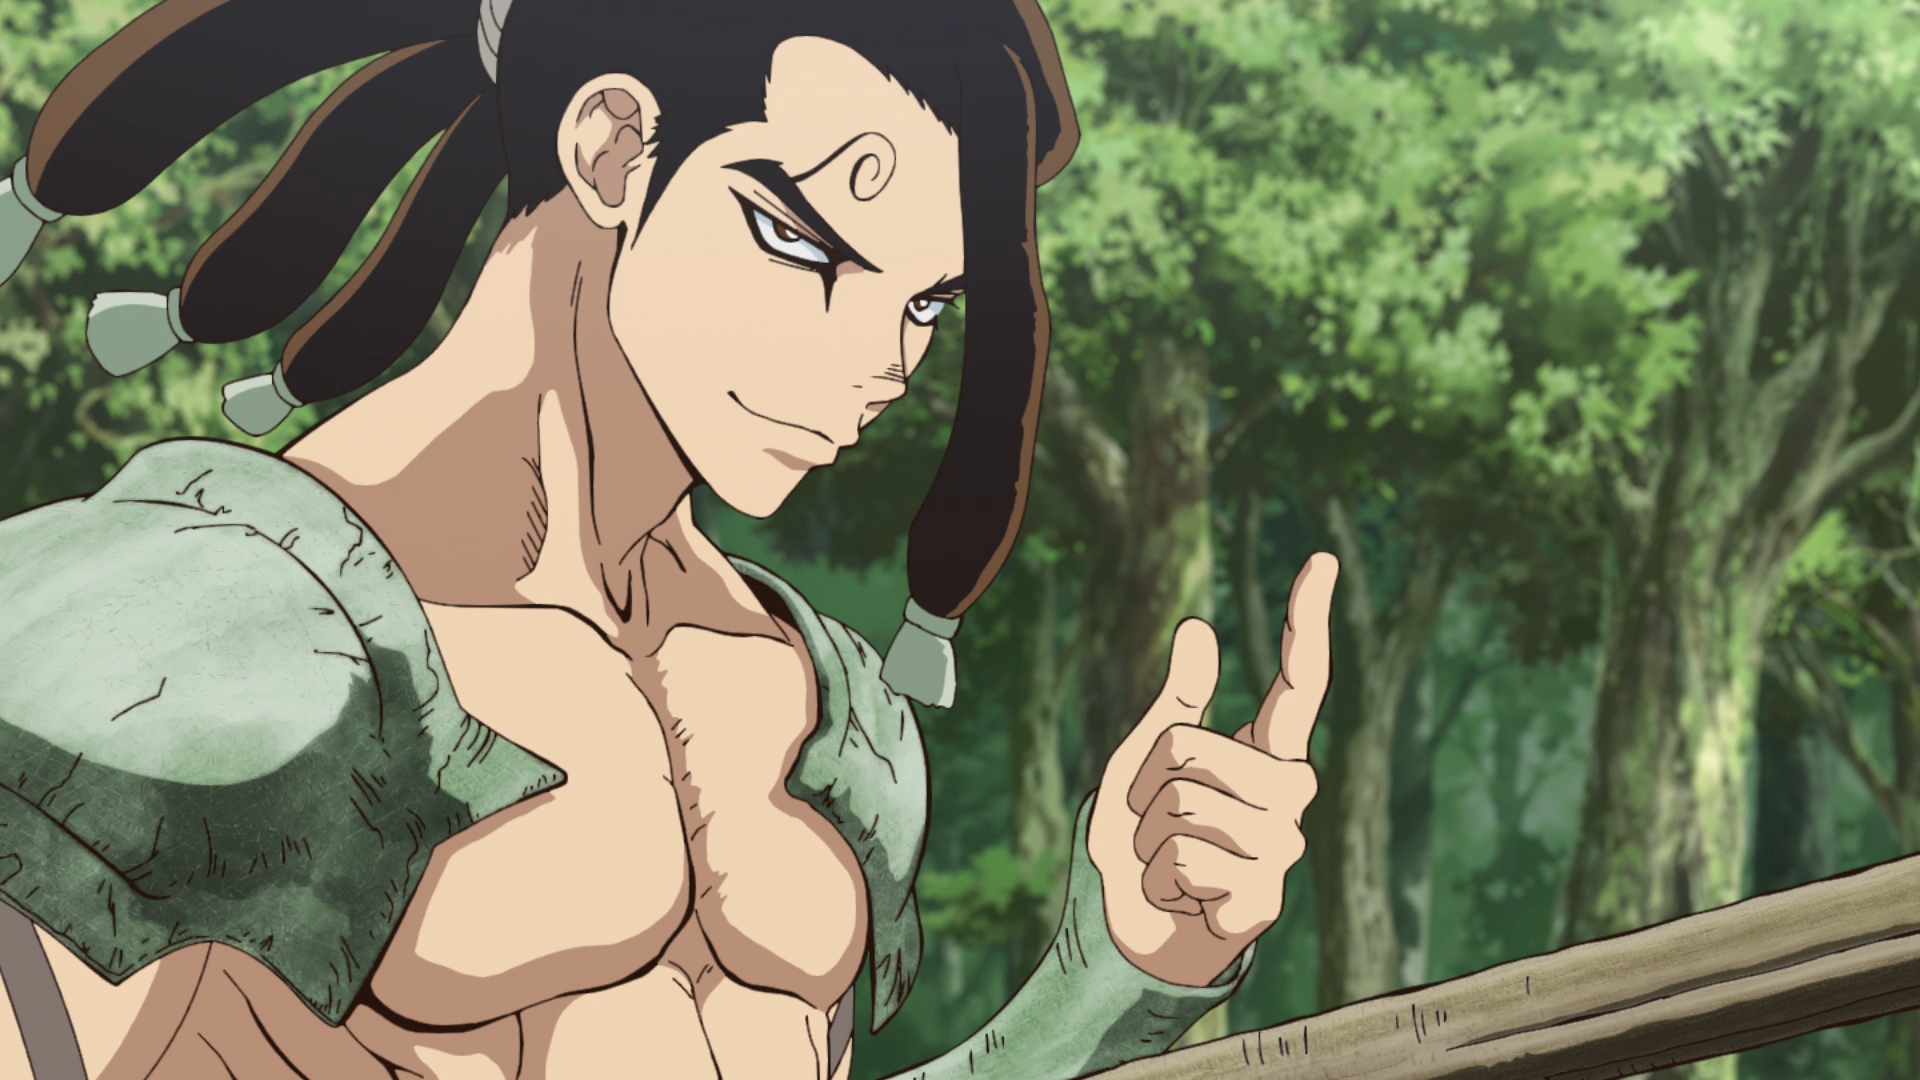 Dr. Stone: New World Episode 17 Preview Reveals Intense Fight